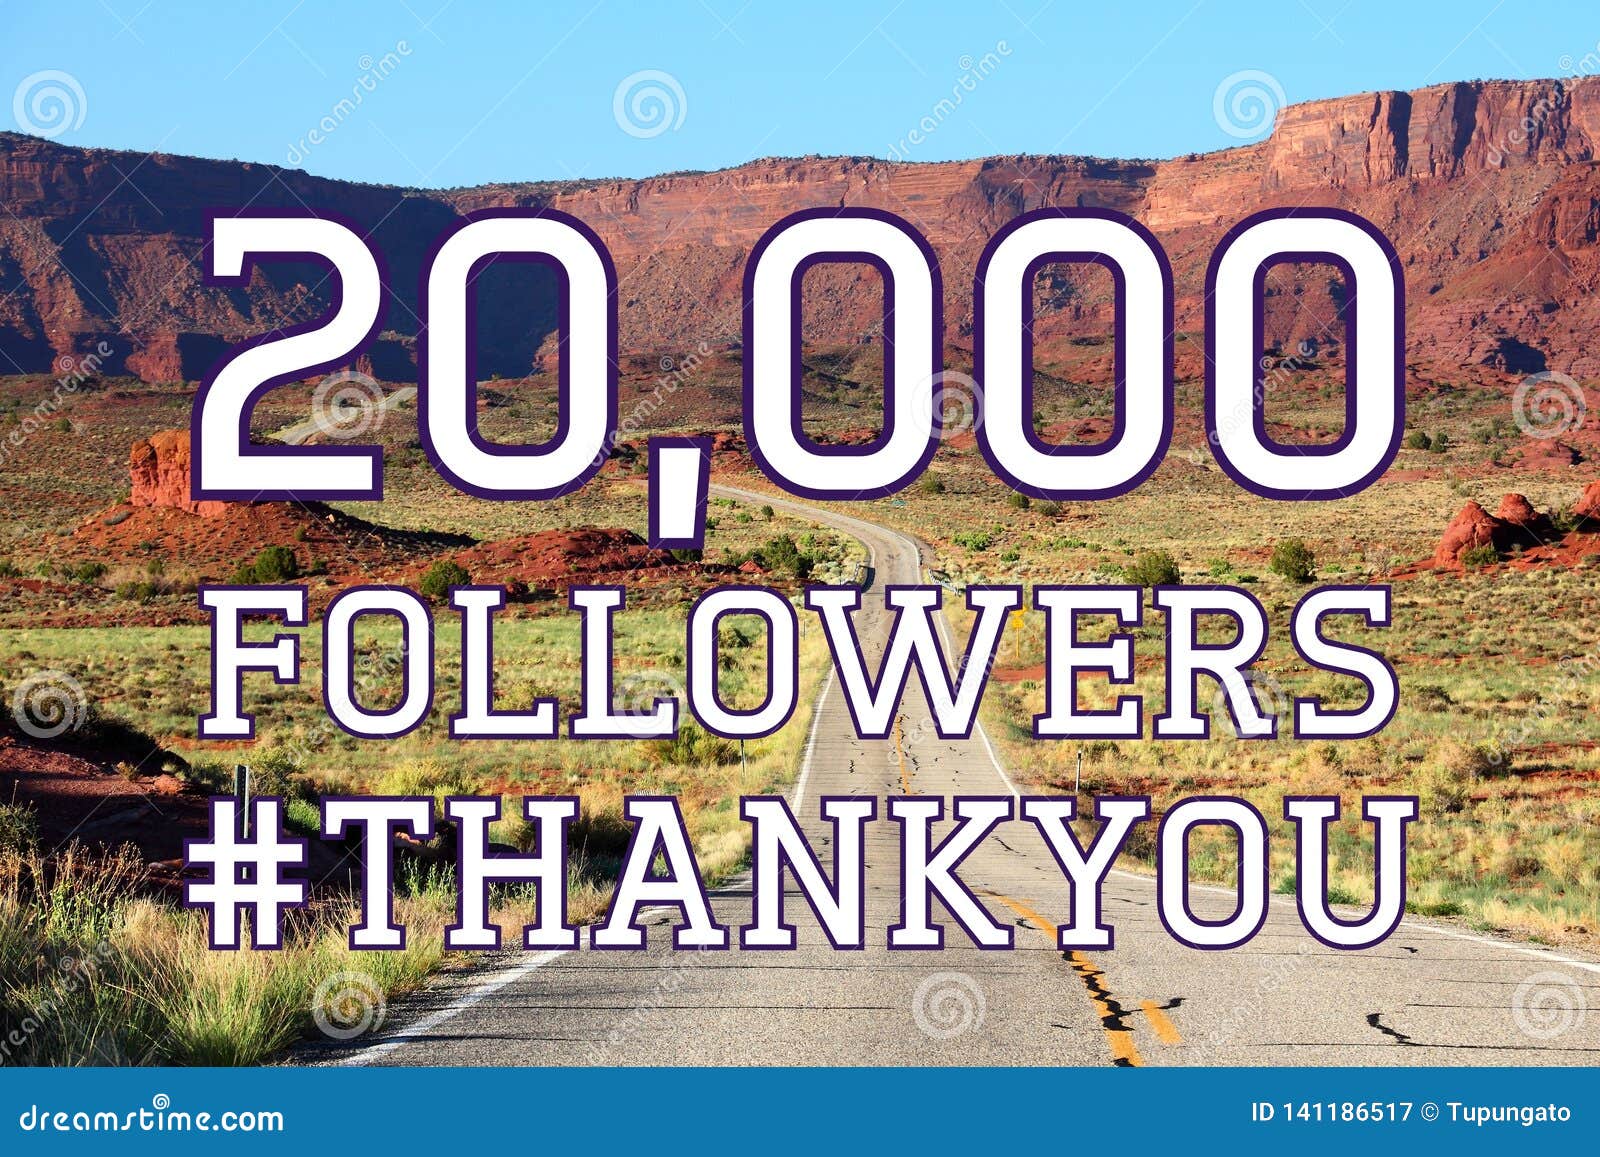 20000 followers stock image. Image of typographic, online ...